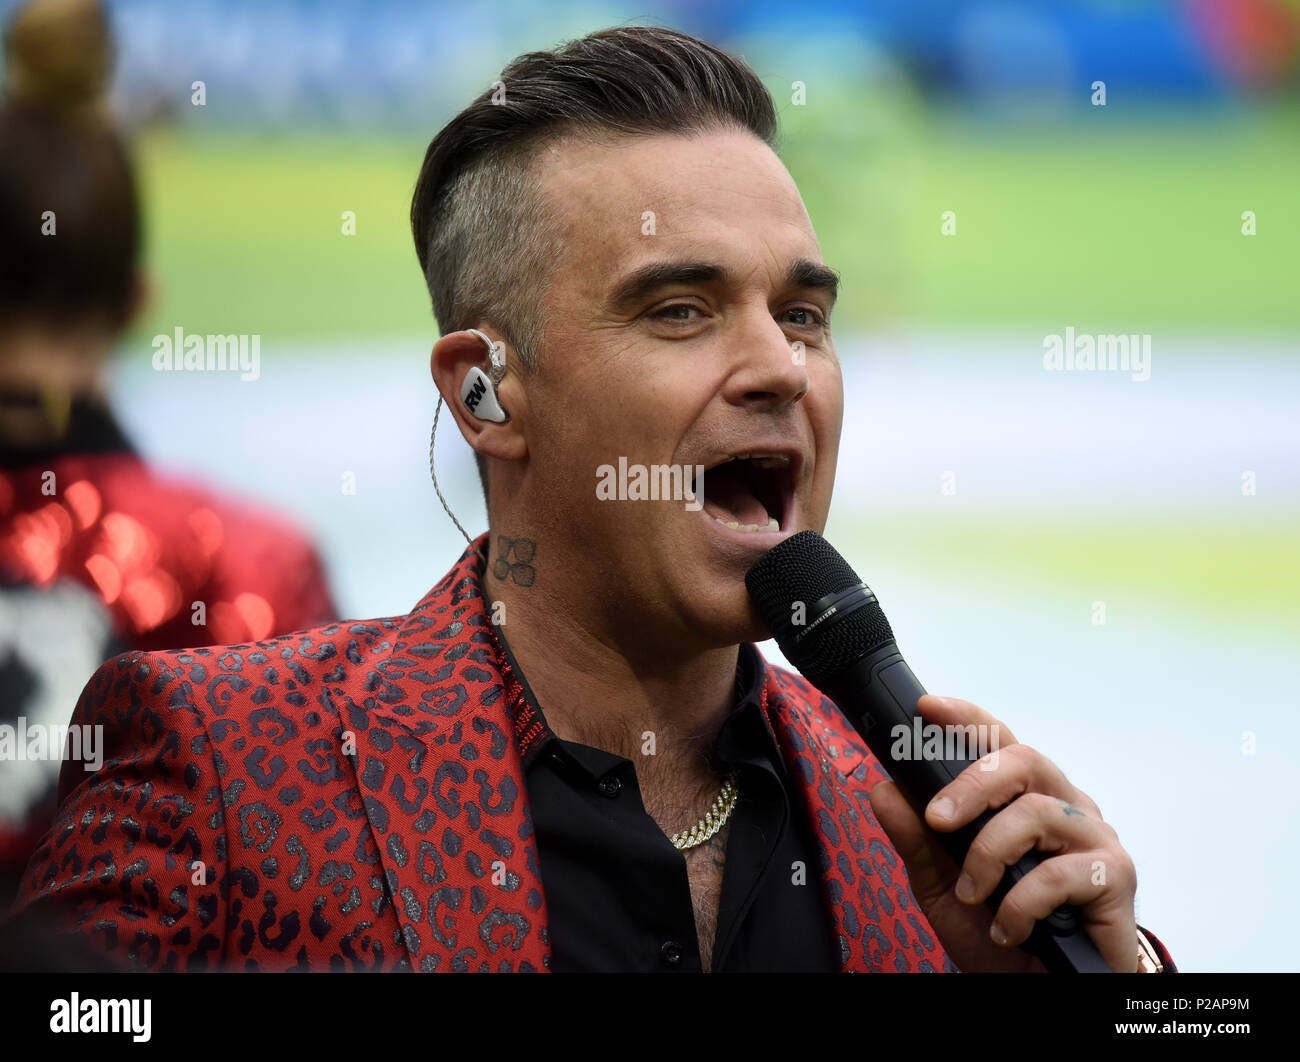 Moscow, Russia - June 14, 2018. British singer Robbie Williams performing at the opening ceremony of FIFA World Cup 2018 in Russia. Credit: Alizada Studios/Alamy Live News Stock Photo